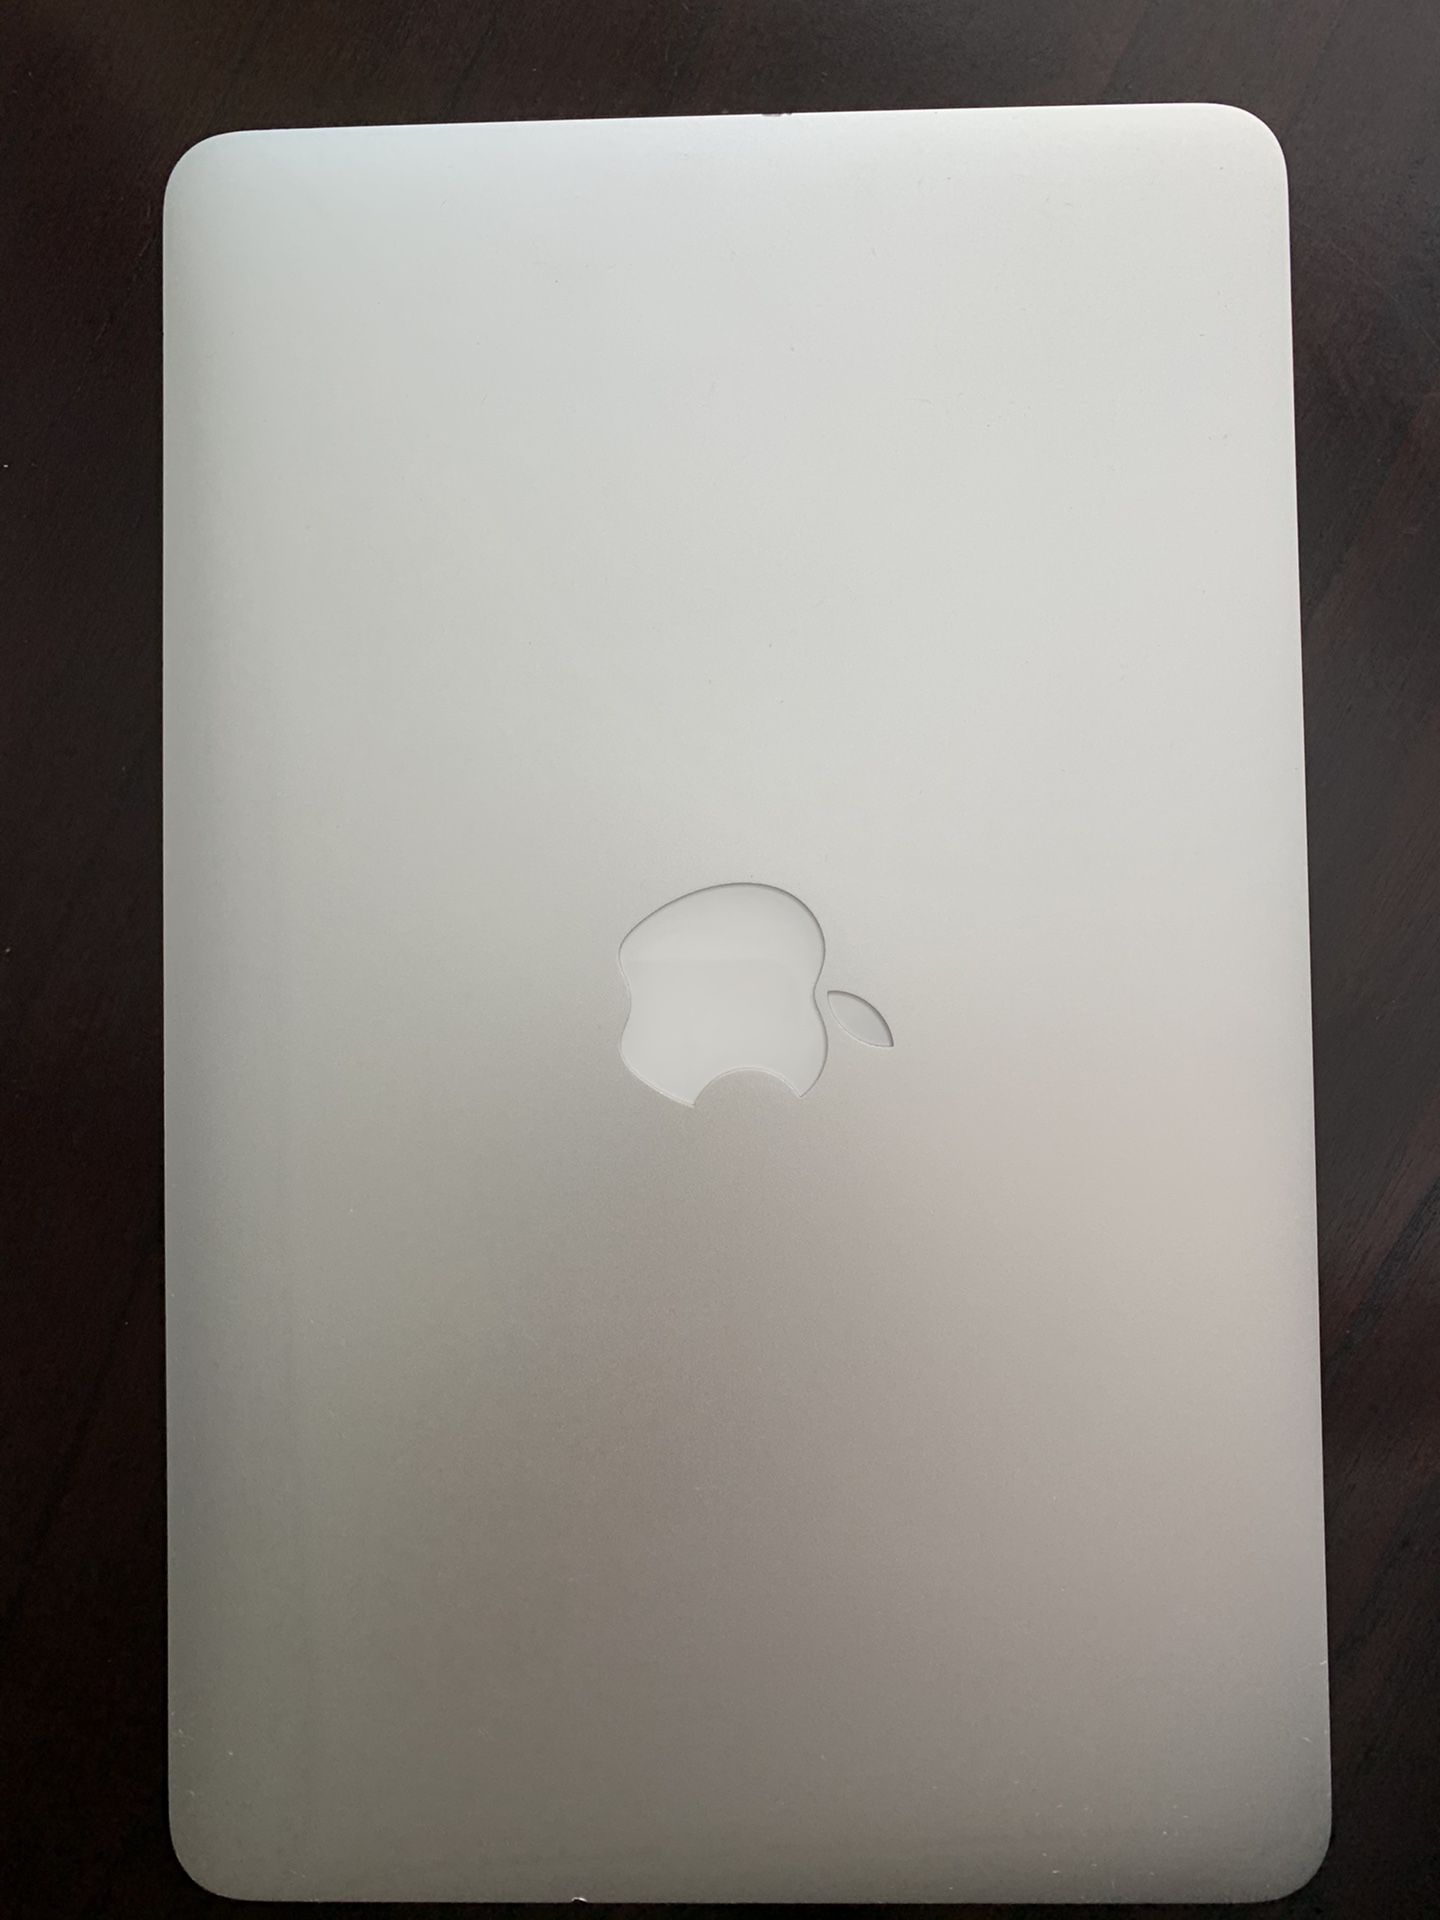 Pristine condition 2014 Macbook Air 11” with Core i5, 4GB RAM, and 121GB Flash Drive